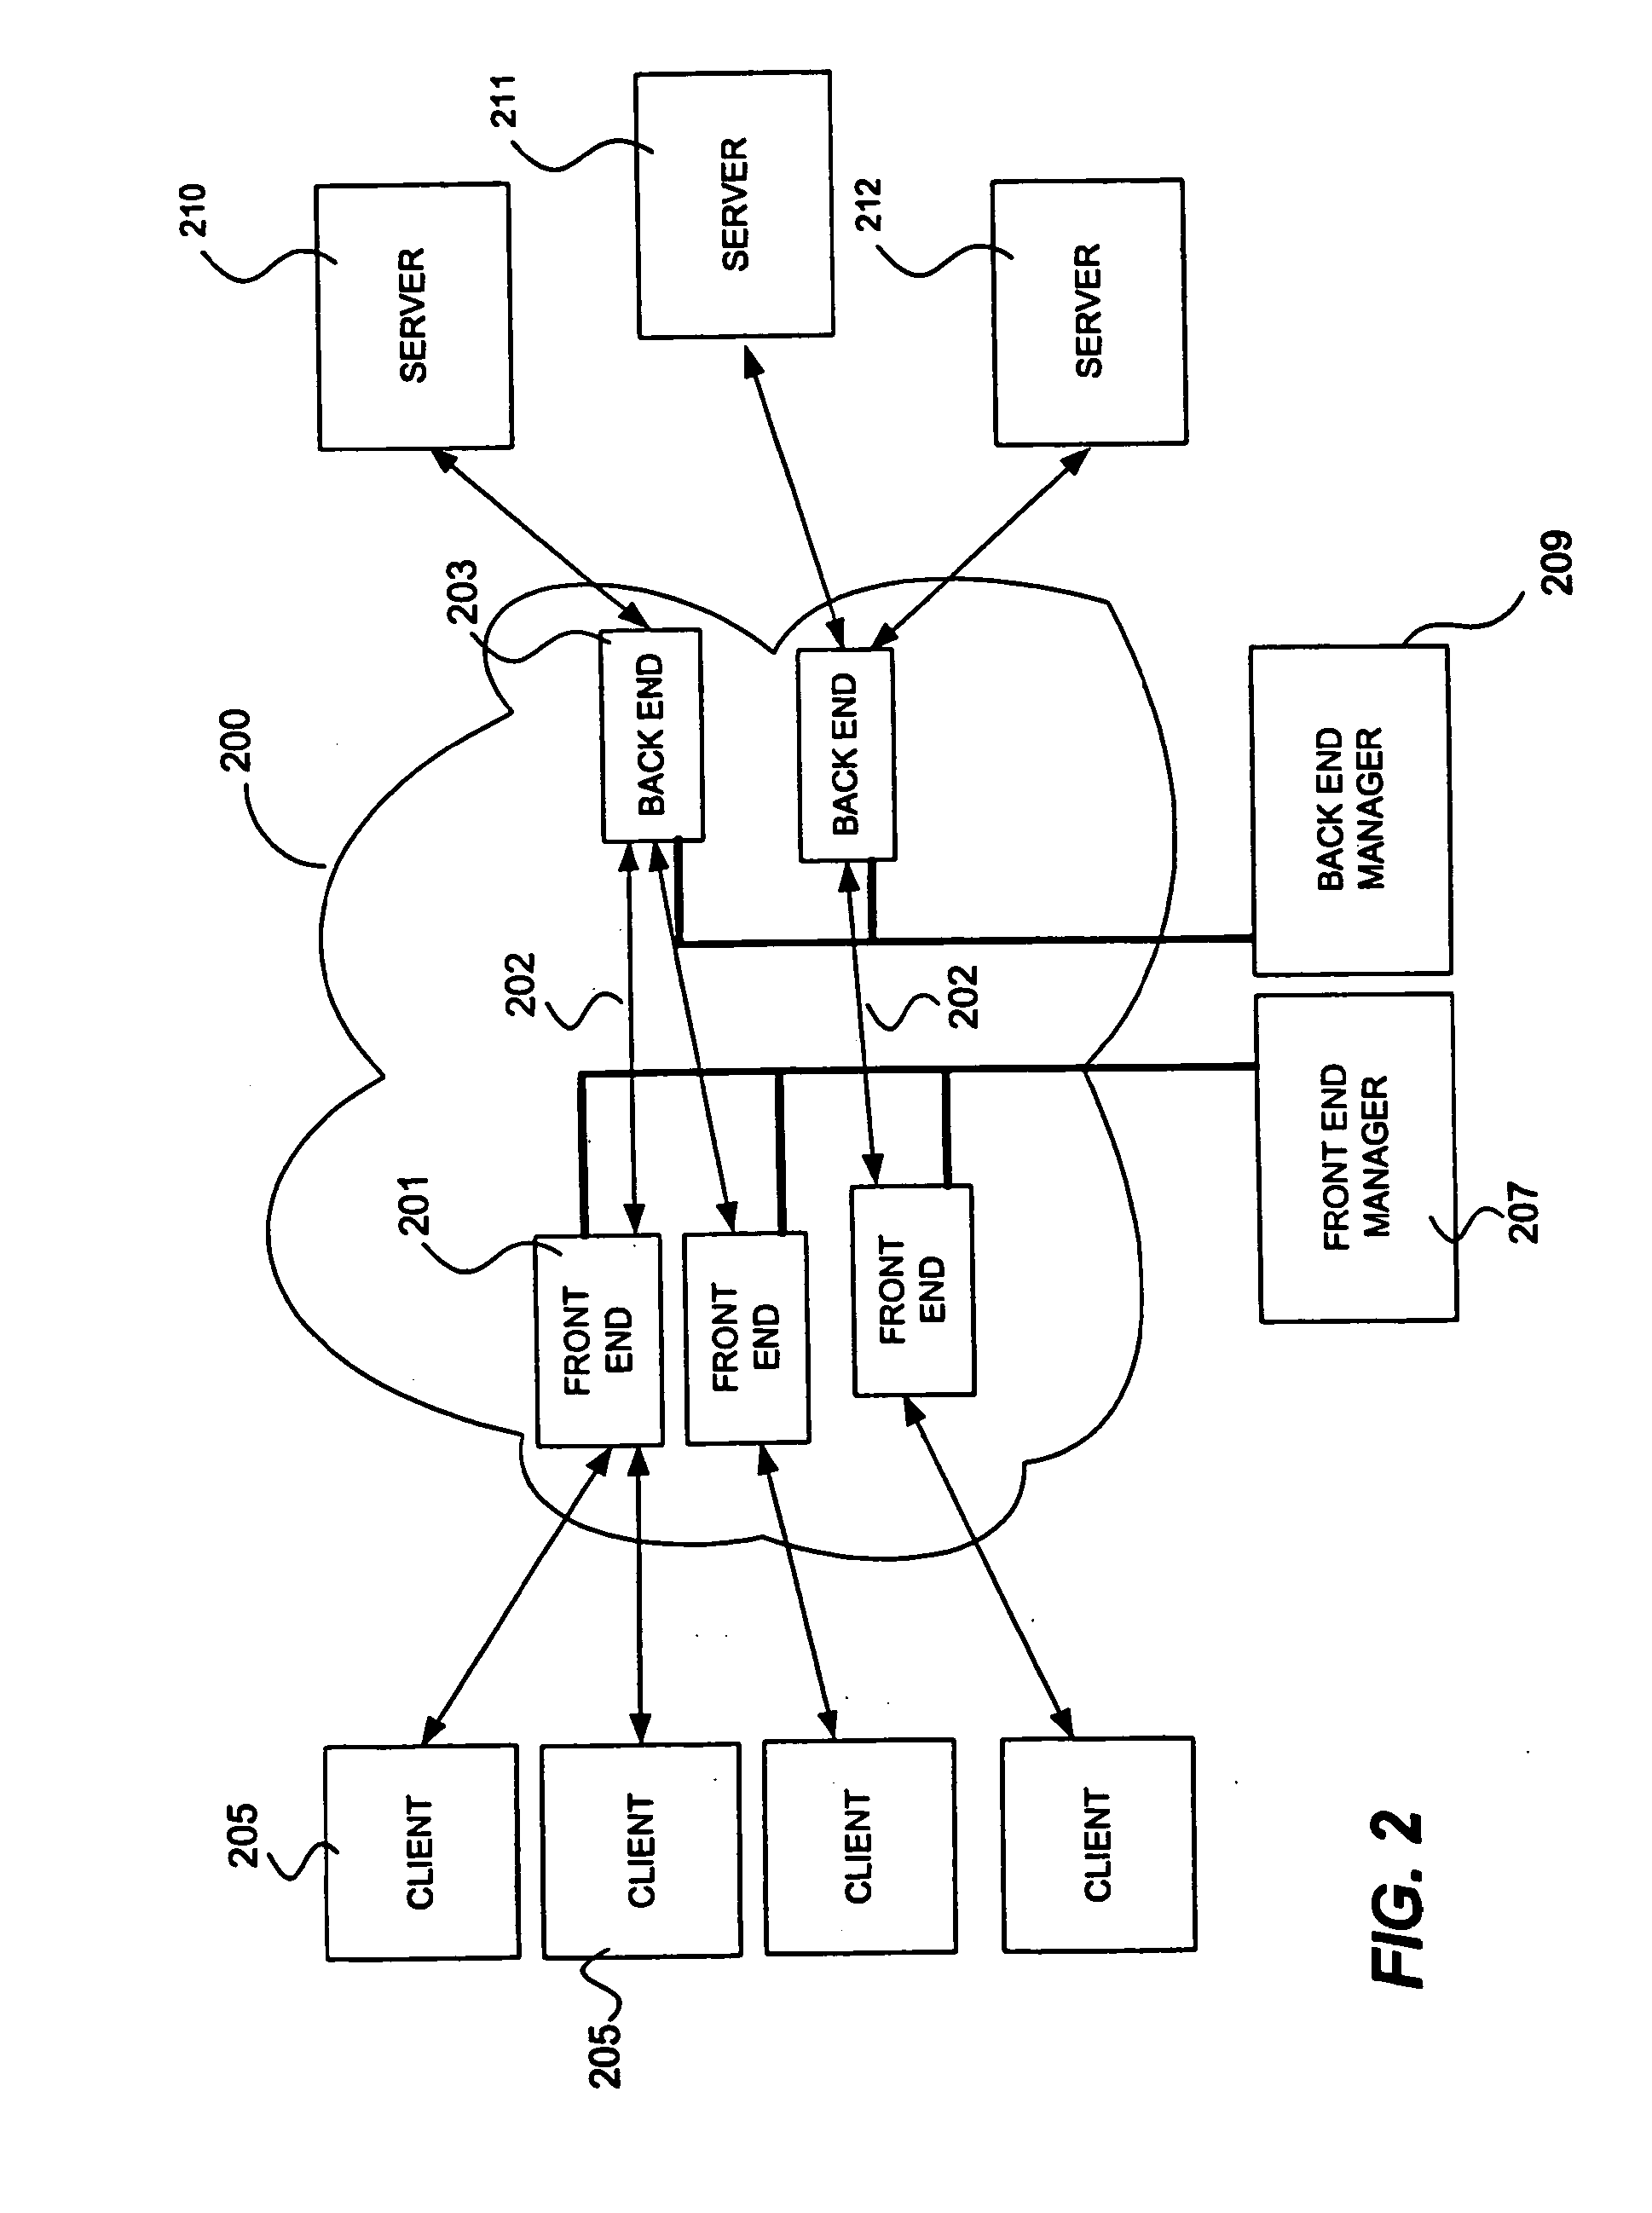 Route aware network link acceleration